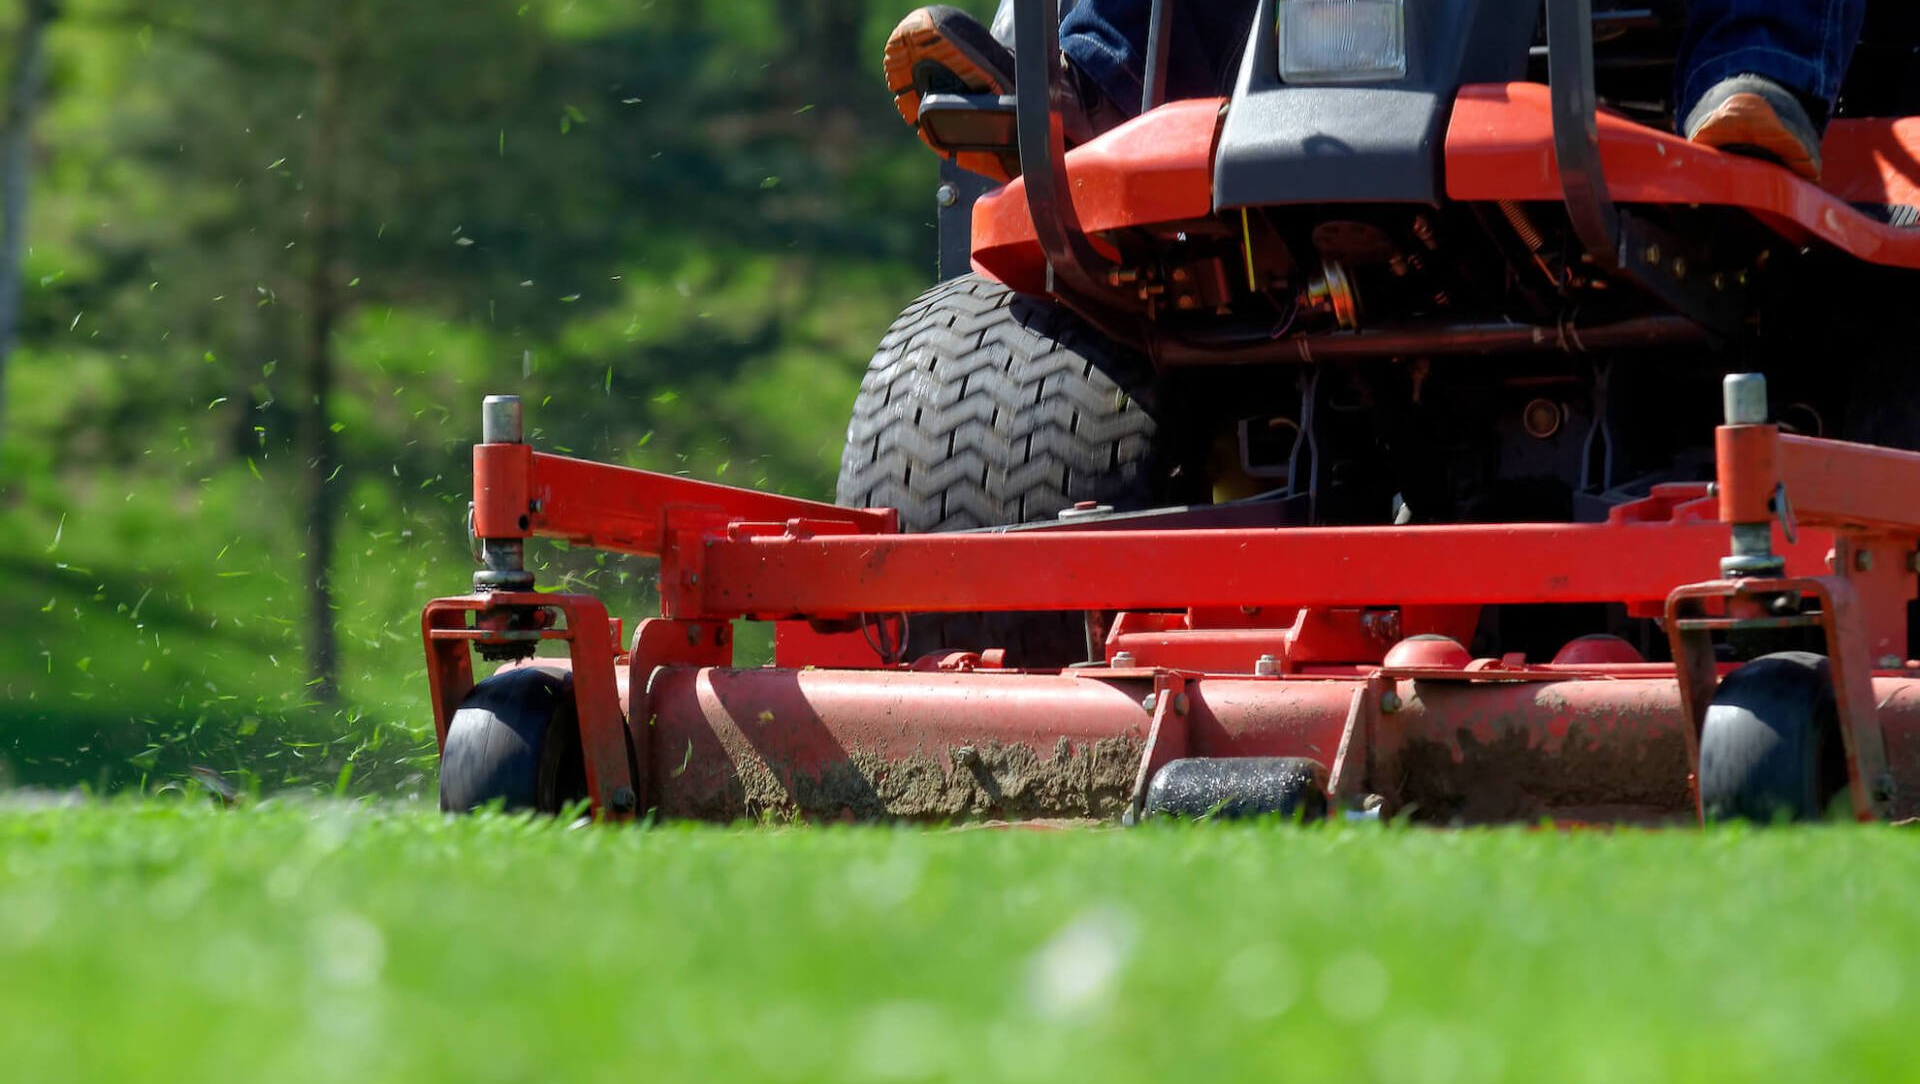 Lawn Mower Providing Commercial Lawn Care